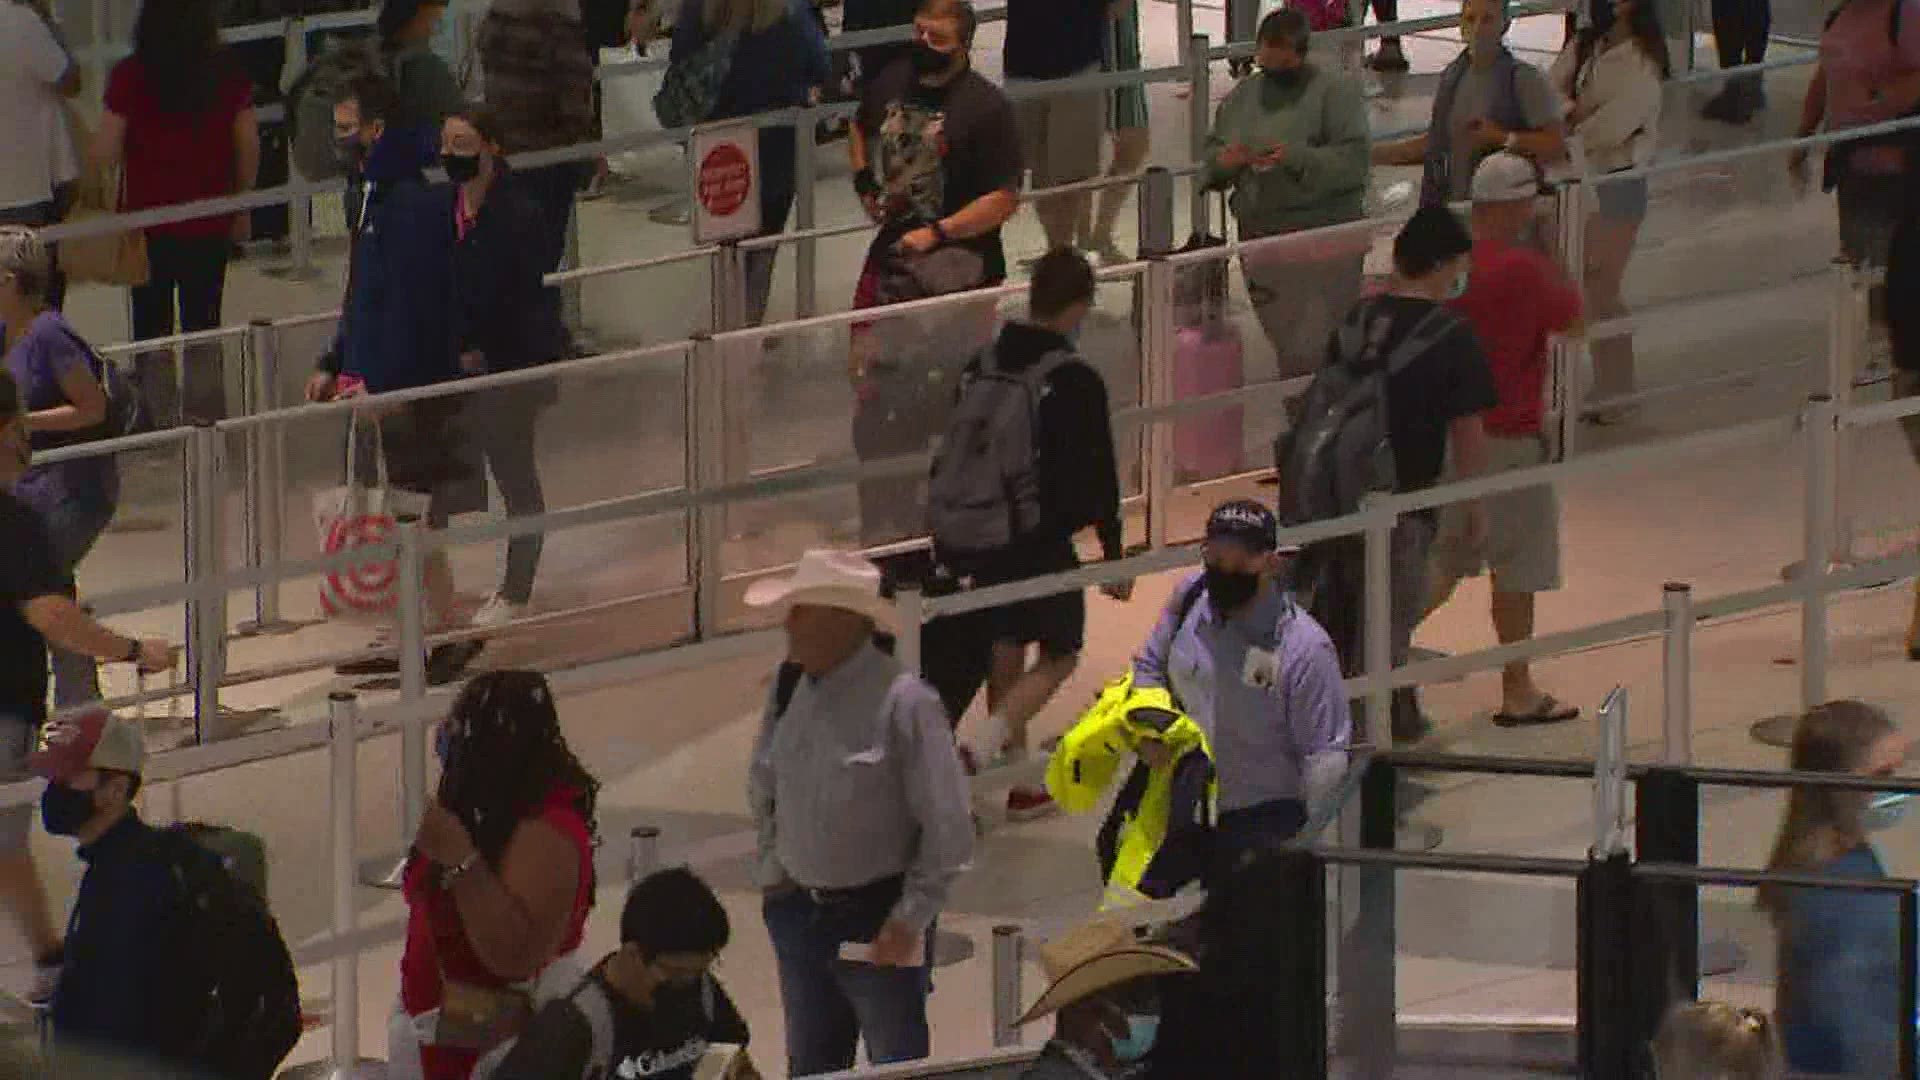 The TSA is encouraging passengers to arrive at the airport as early as possible to avoid potential problems with delays.